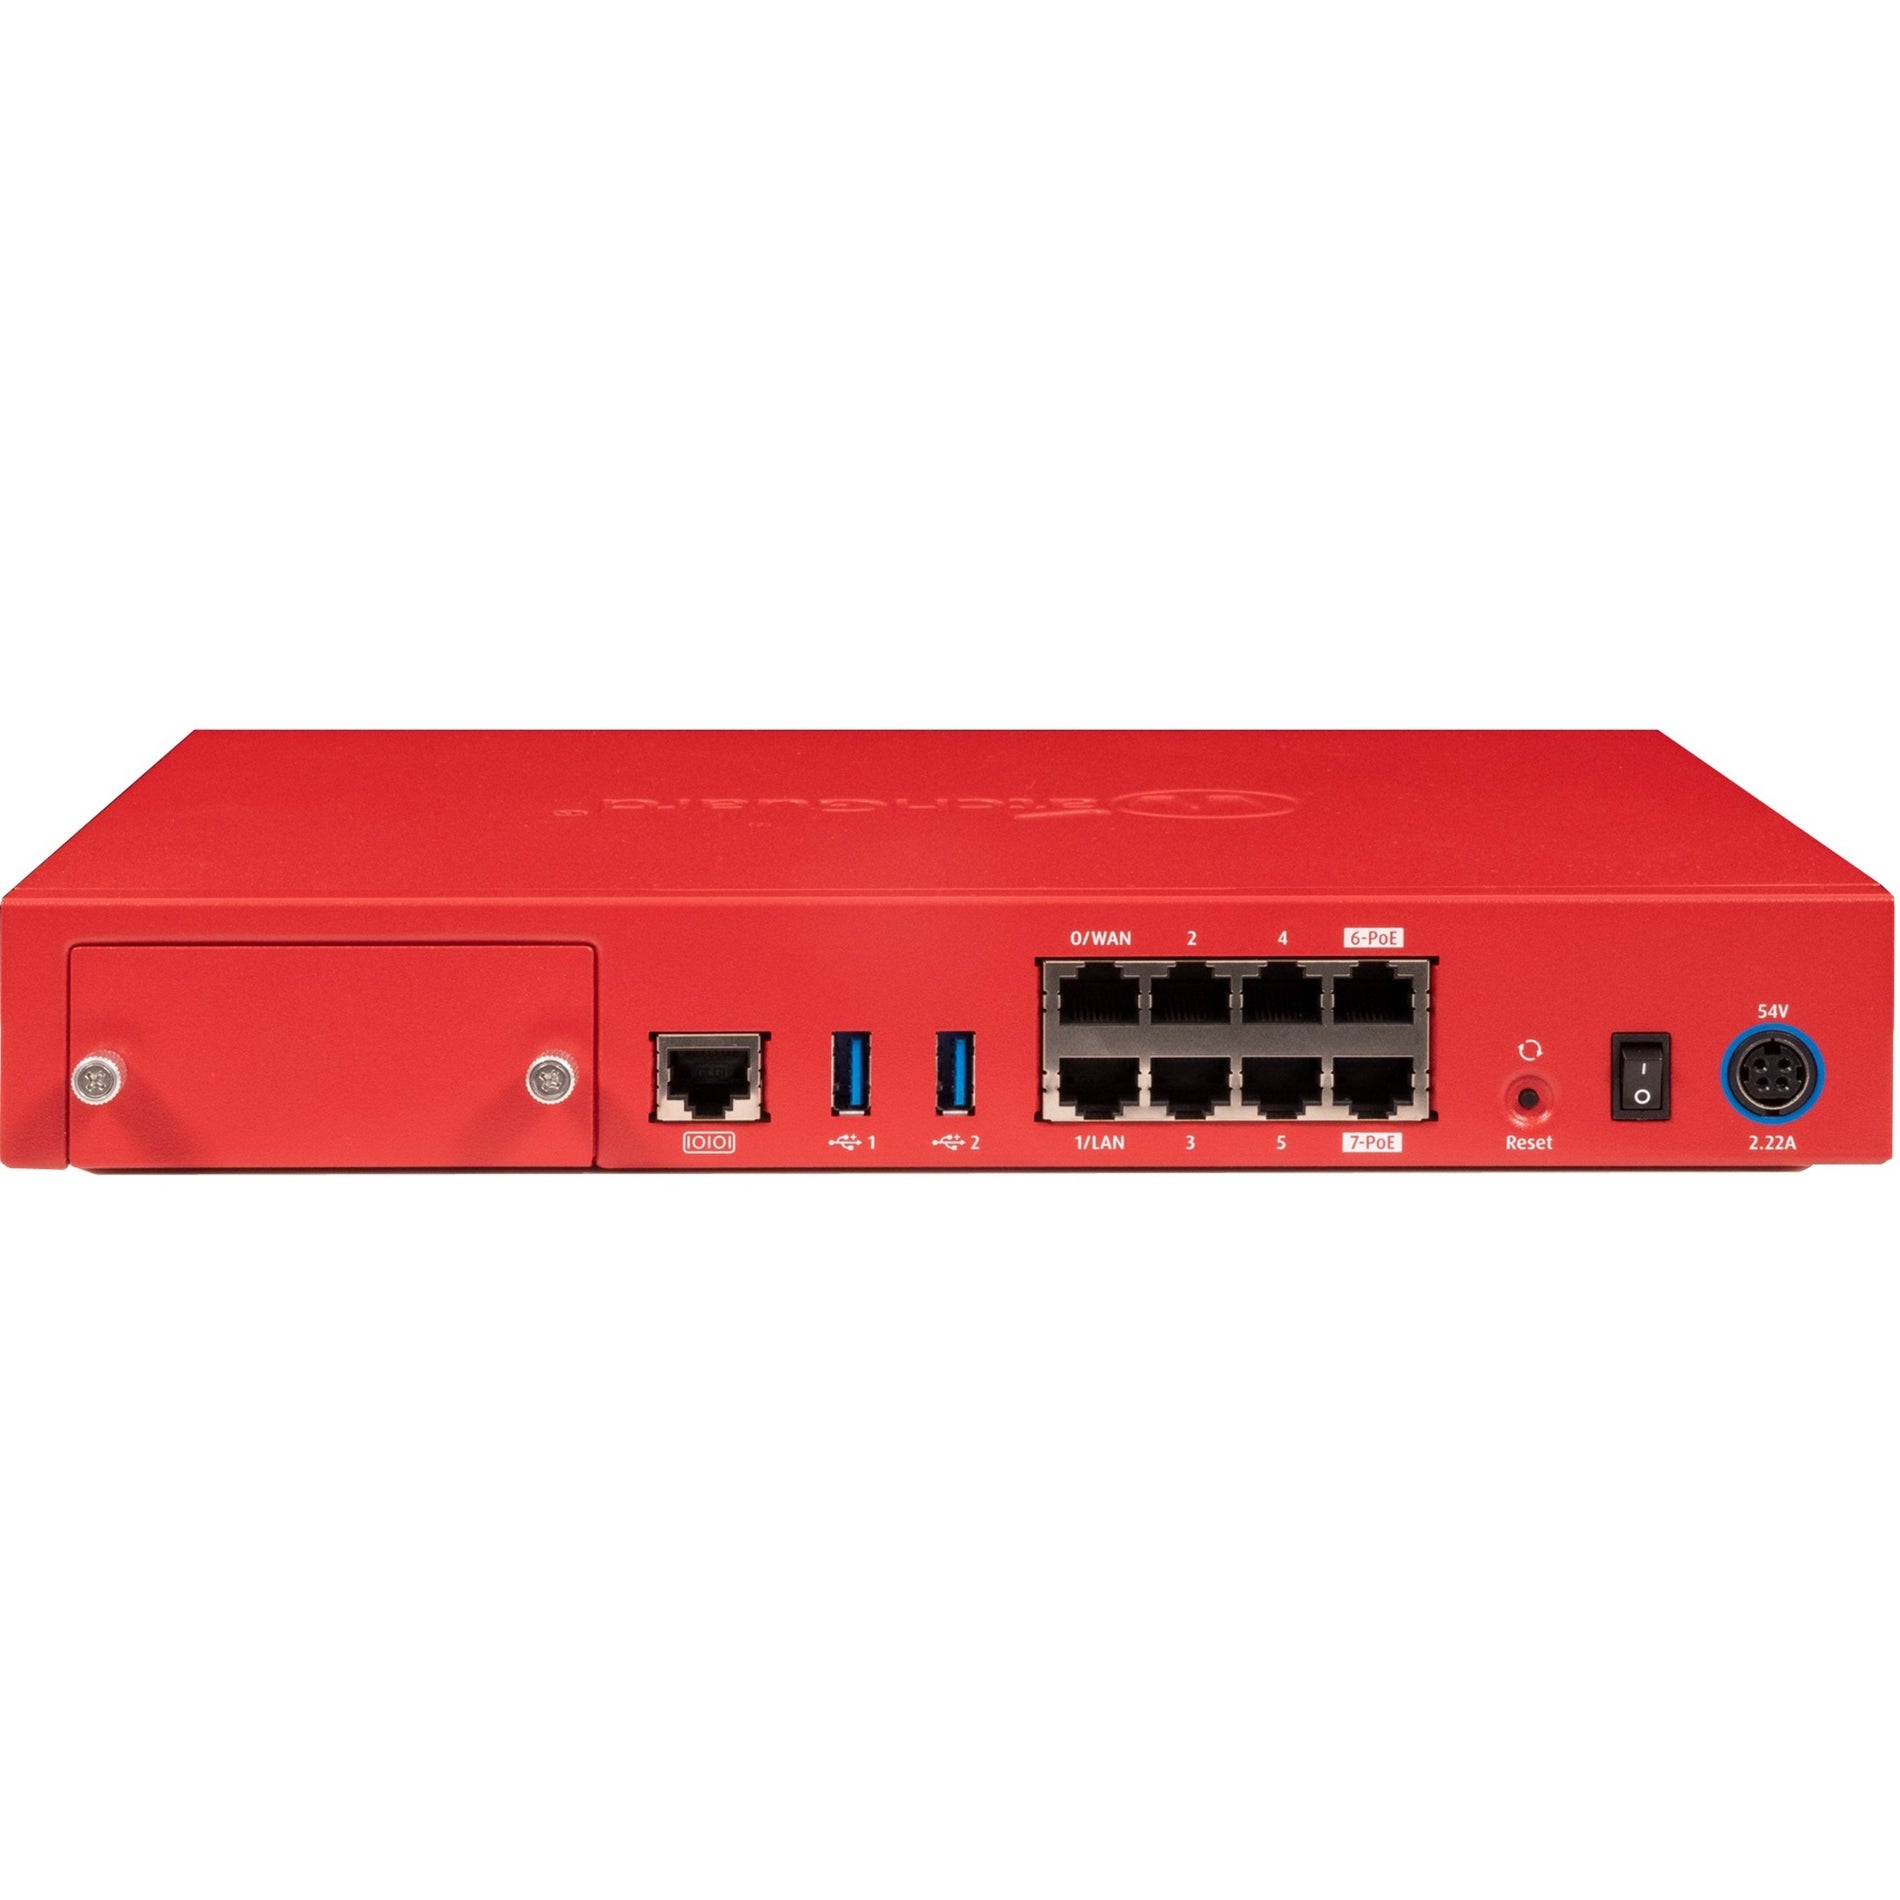 WatchGuard Firebox T80 Network Security/Firewall Appliance with 1-Year Total Security Suite [Discontinued]